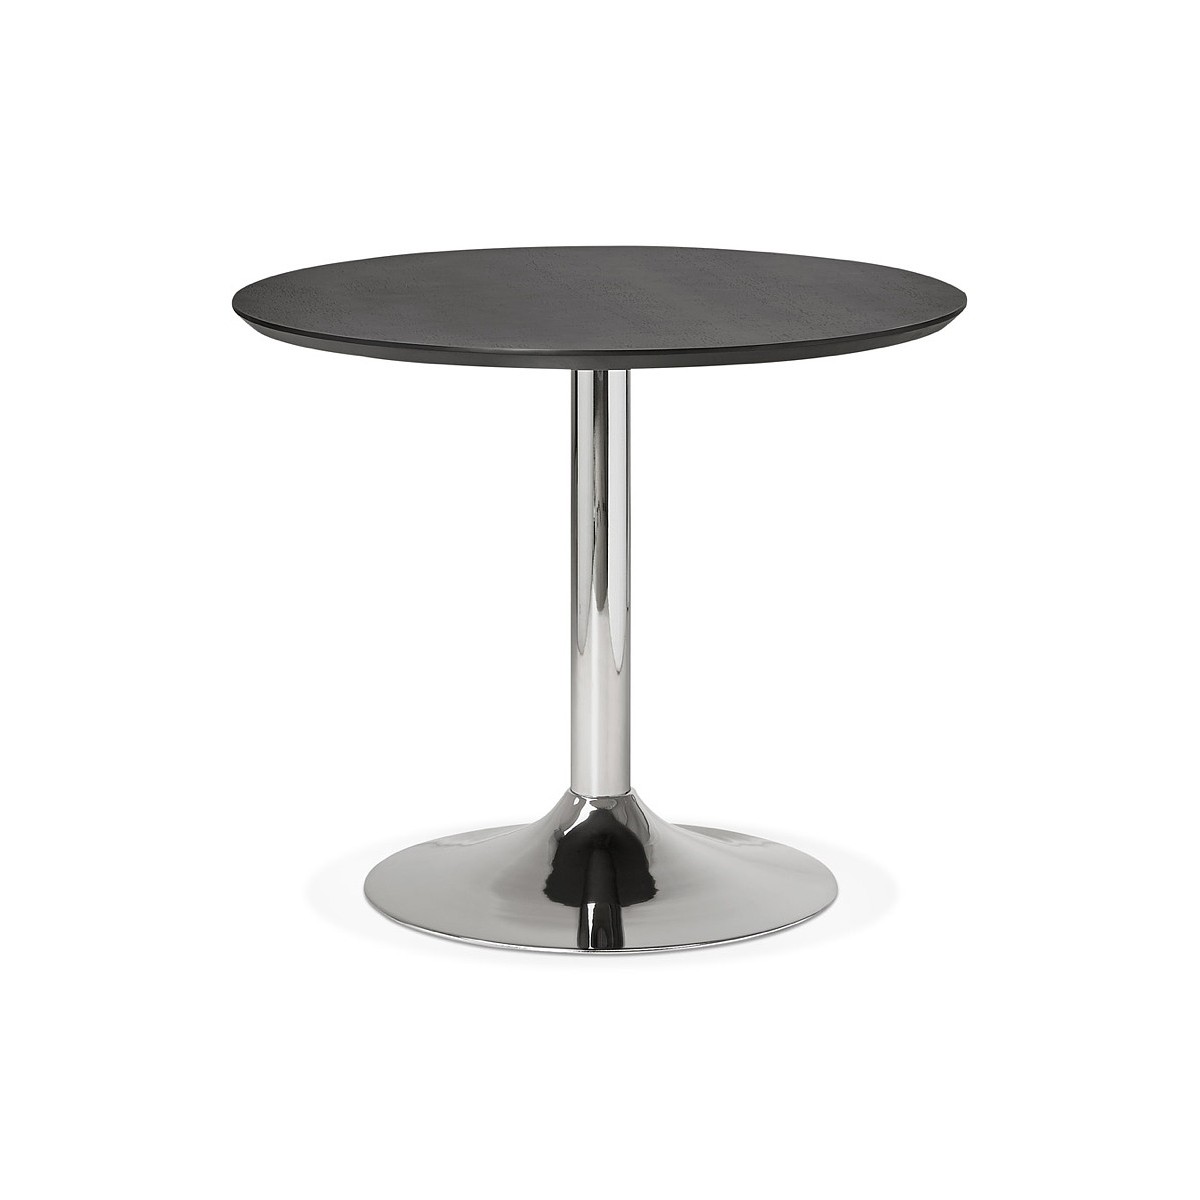 Round Dining Table Design Or Office Maud In Mdf And Chromed Metal 90 Cm Black